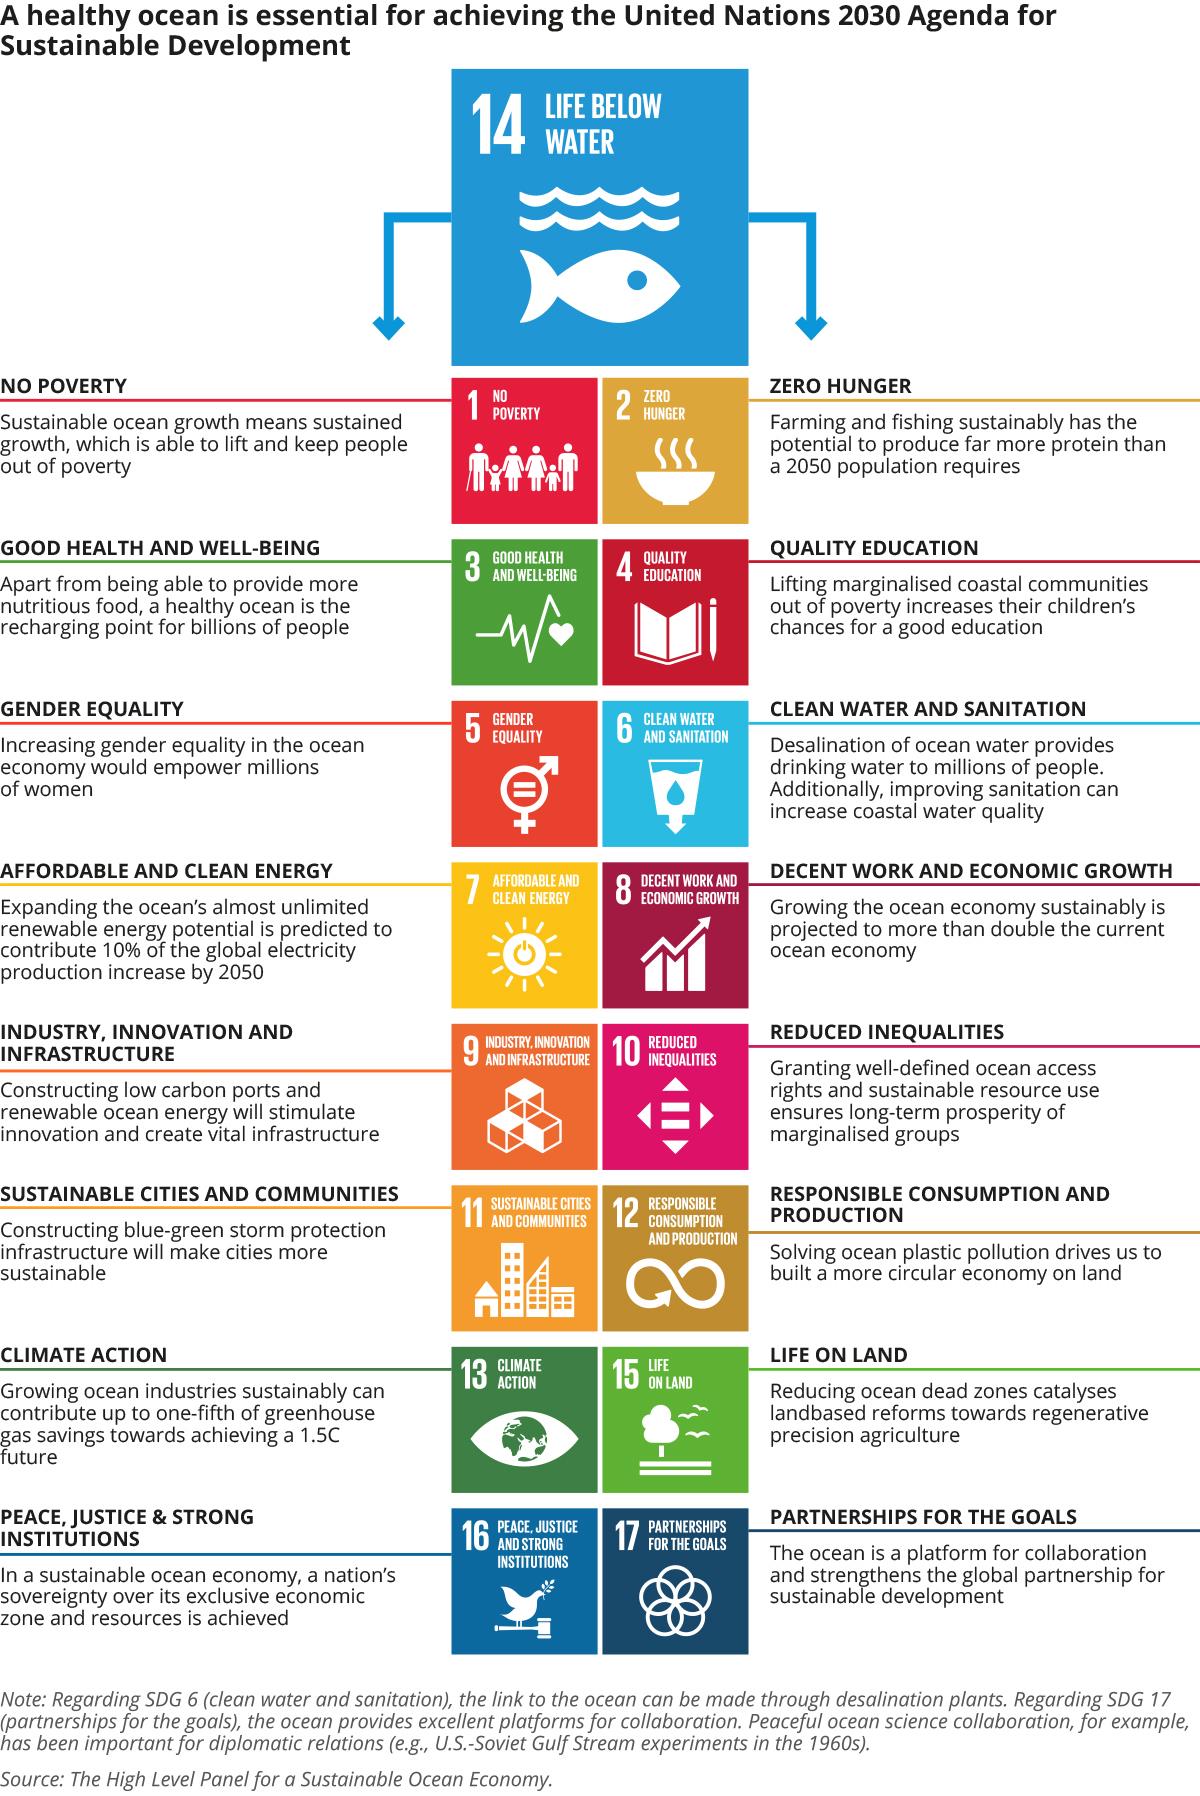 Illustration of the Unites Nations Sustainable Development Goals with explanatory text.